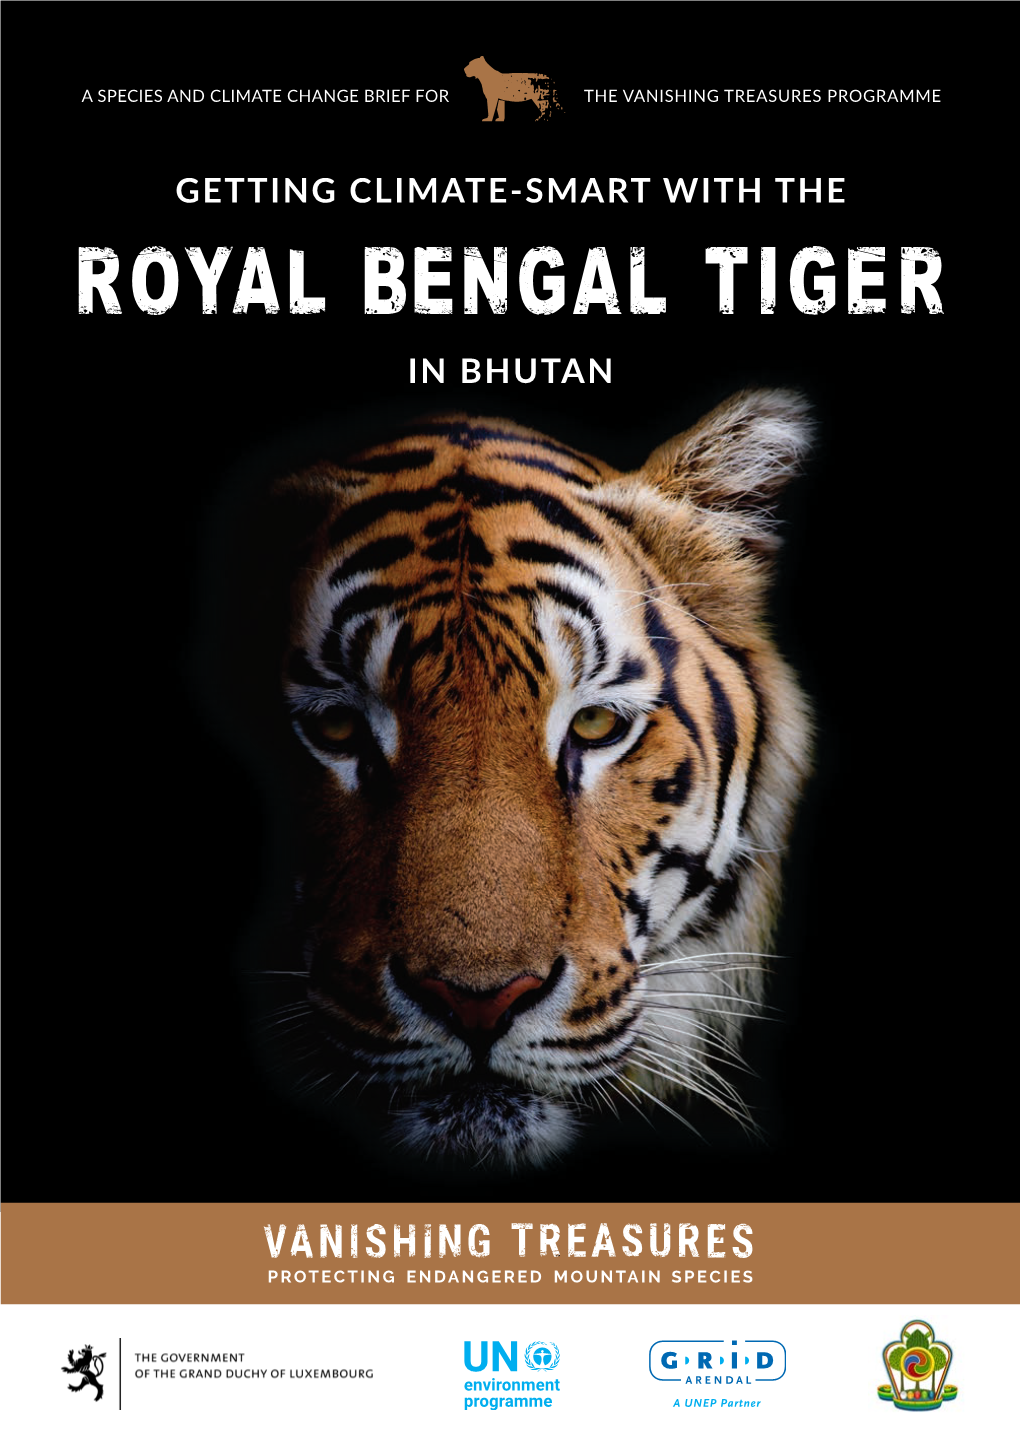 Getting Climate-Smart with the Royal Bengal Tiger in Bhutan: a Species and Climate Change Brief for the Vanishing Treasures Programme